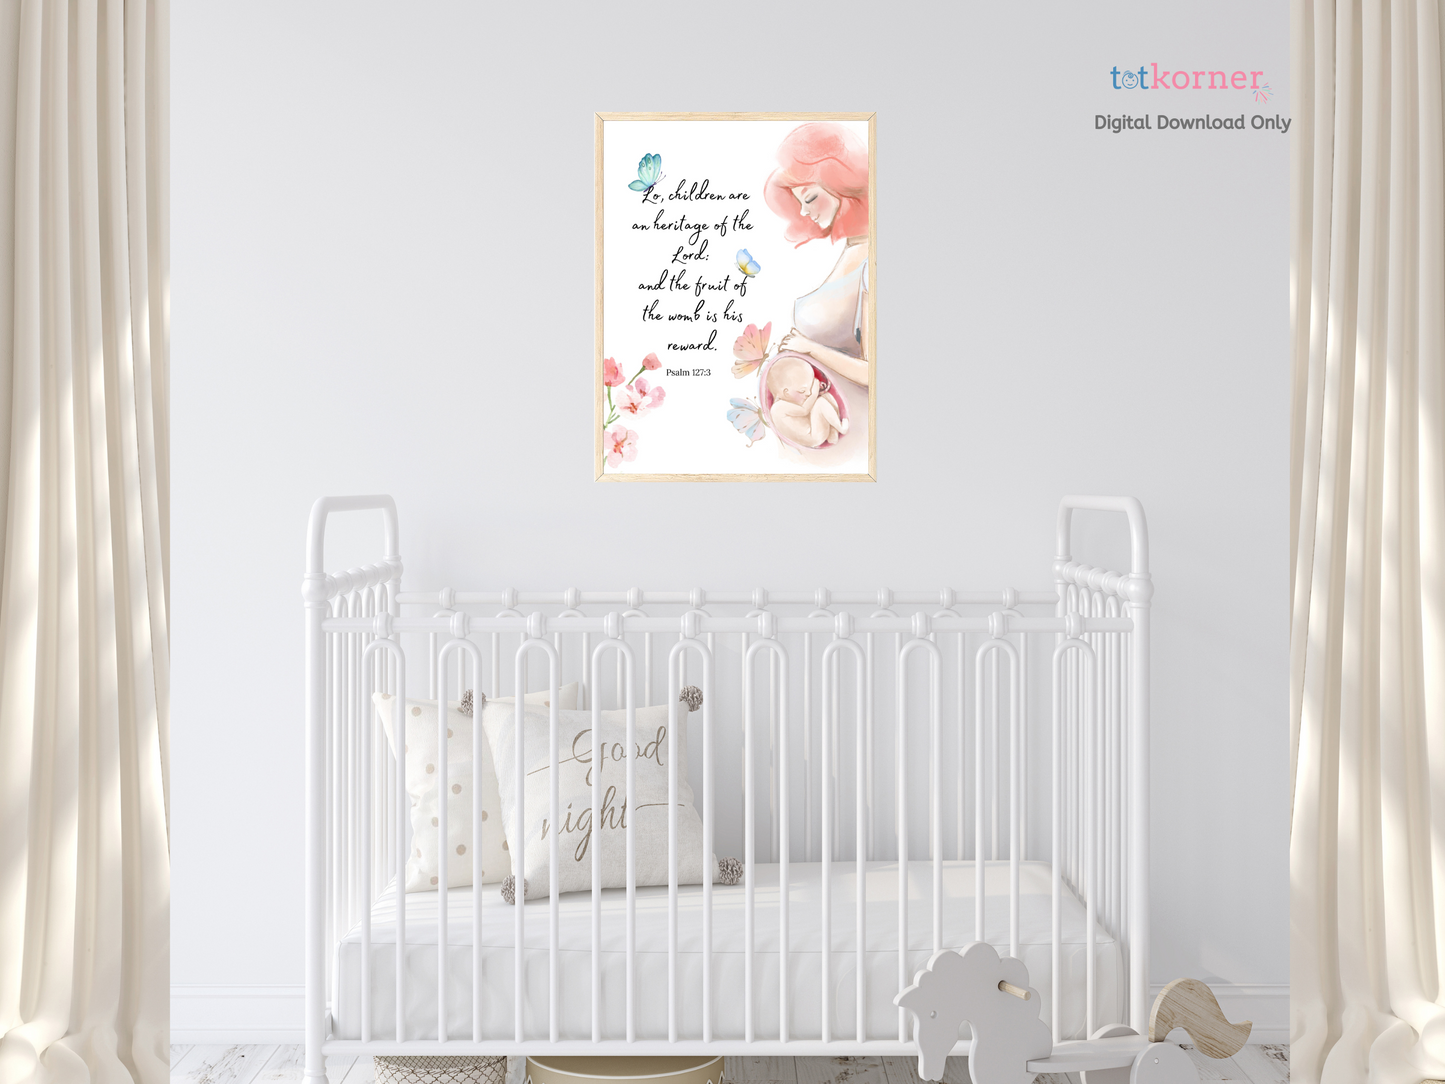 Christian wall art with scriptures | Christian Wall pictures | Christian wall decor inspirational | Christian wall hangings and pictures | Christian artwork for walls | Christian kids wall art | religious wall art